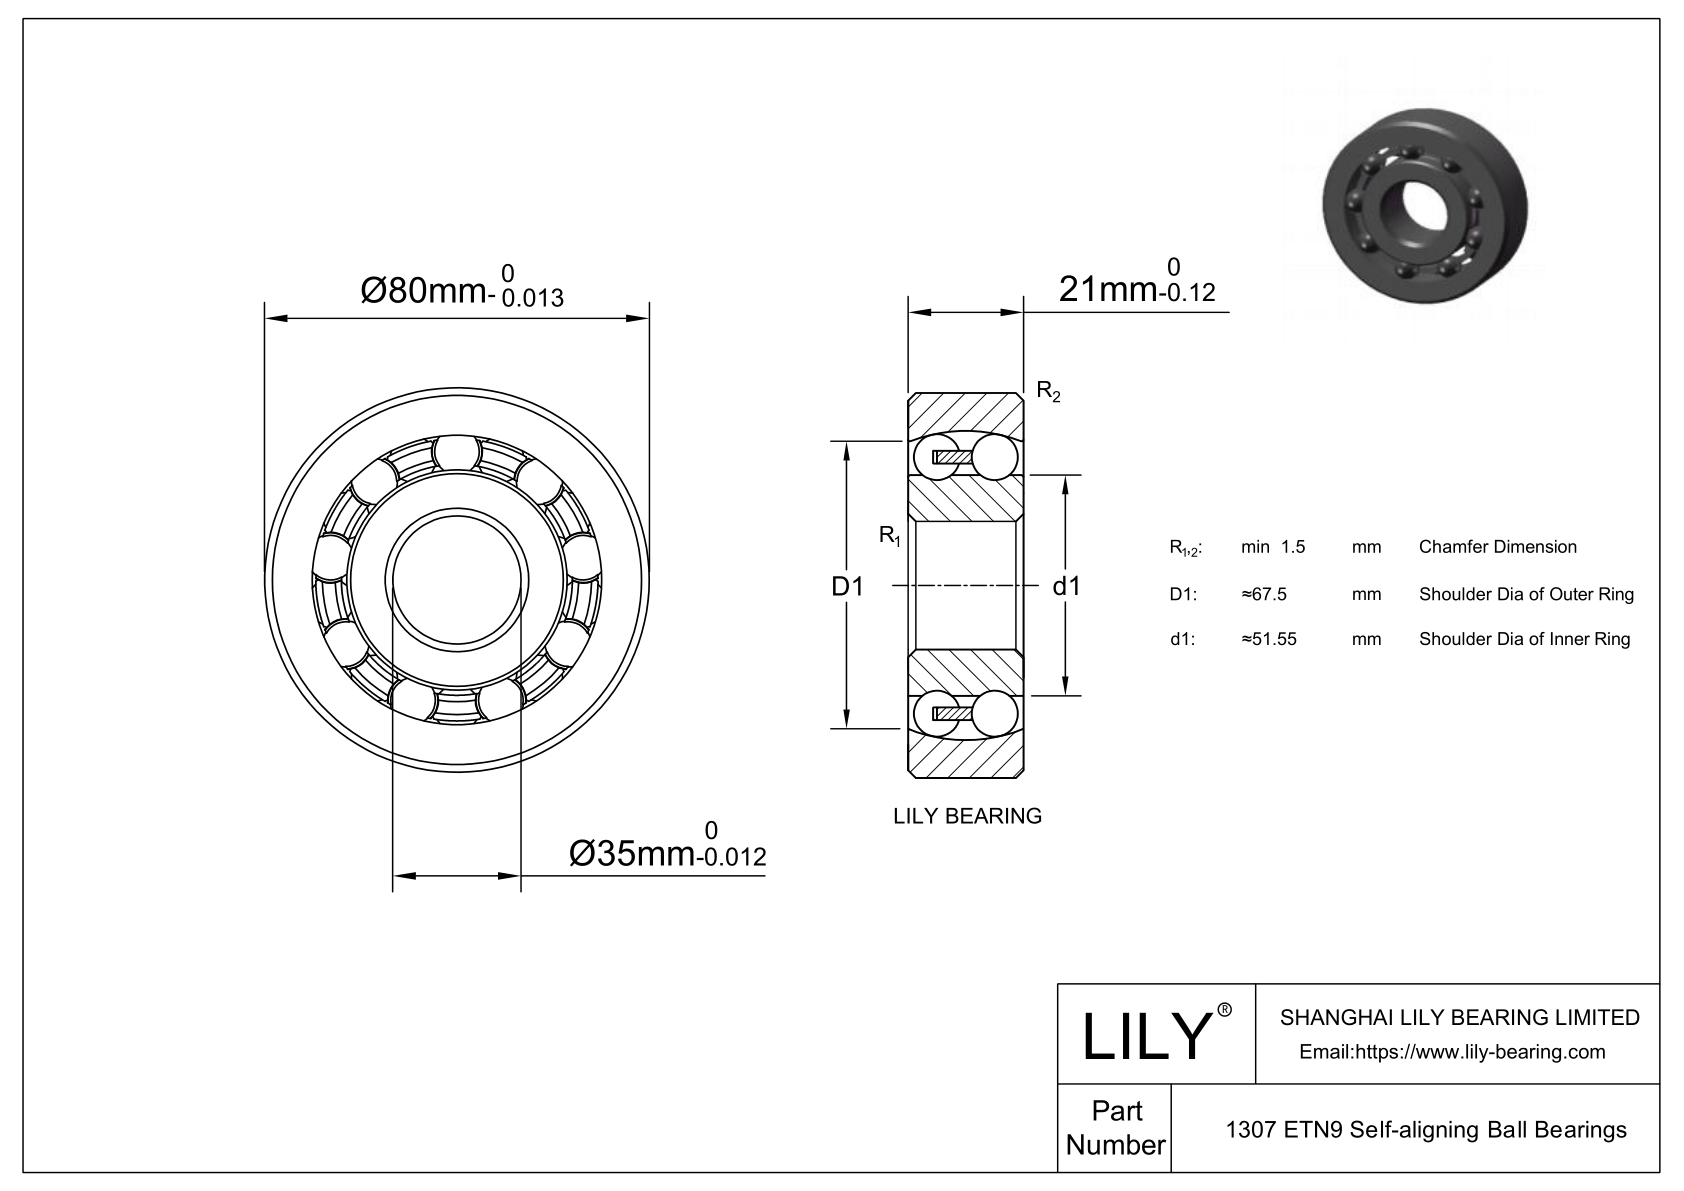 S1307 ETN9 Stainless Steel Self Aligning Ball Bearings cad drawing